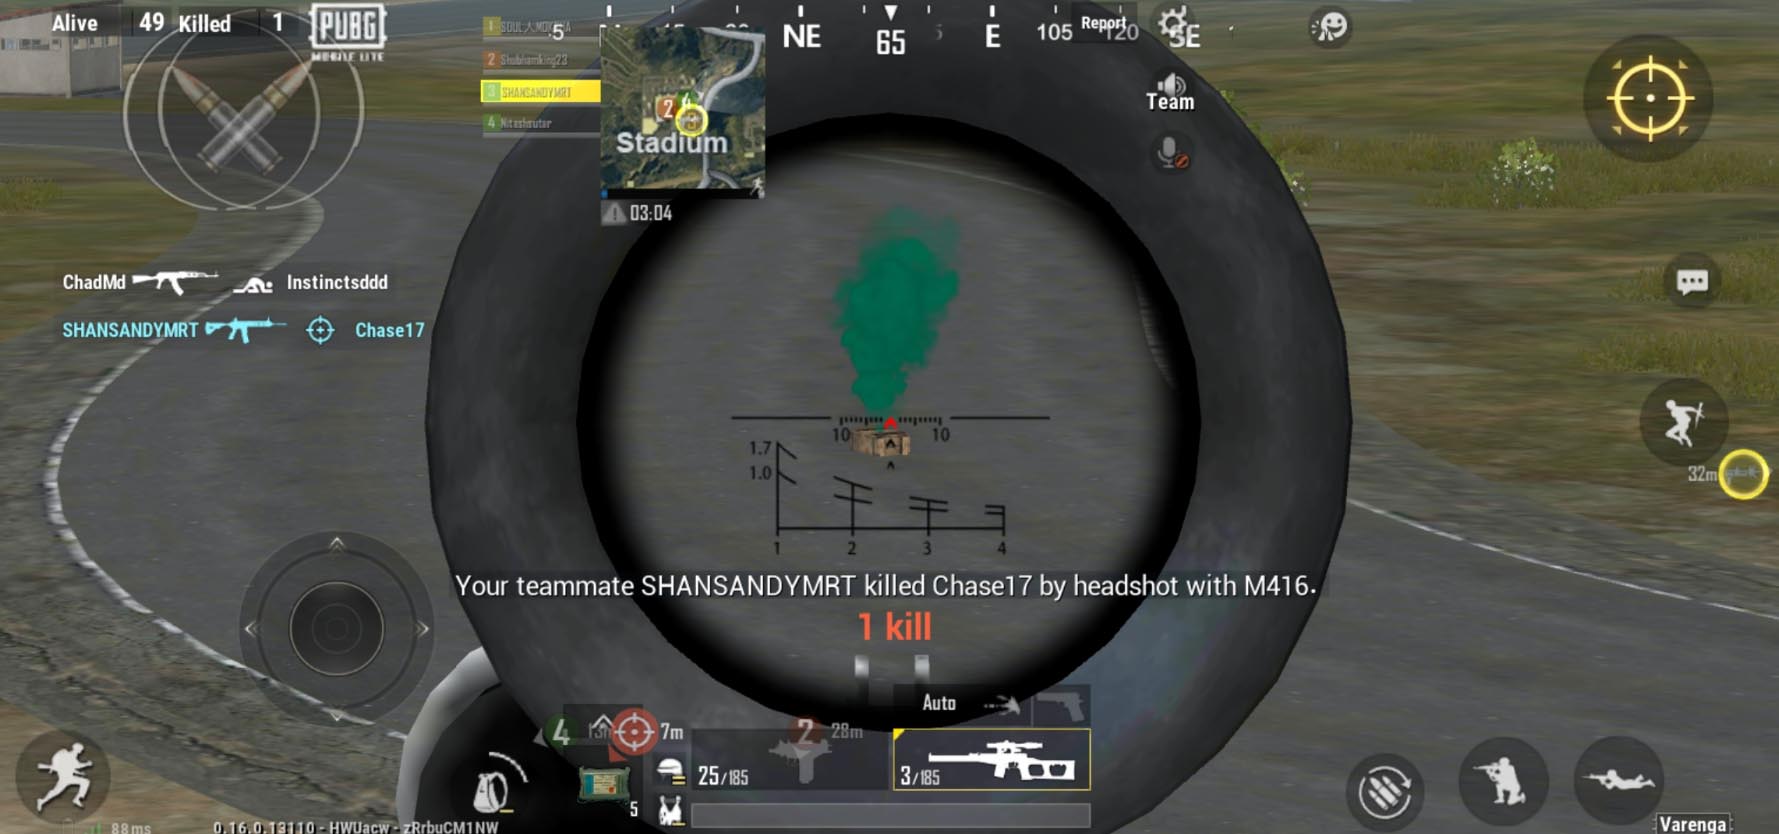 How To Use The Vss Sniper Rifle In Pubg Mobile Game